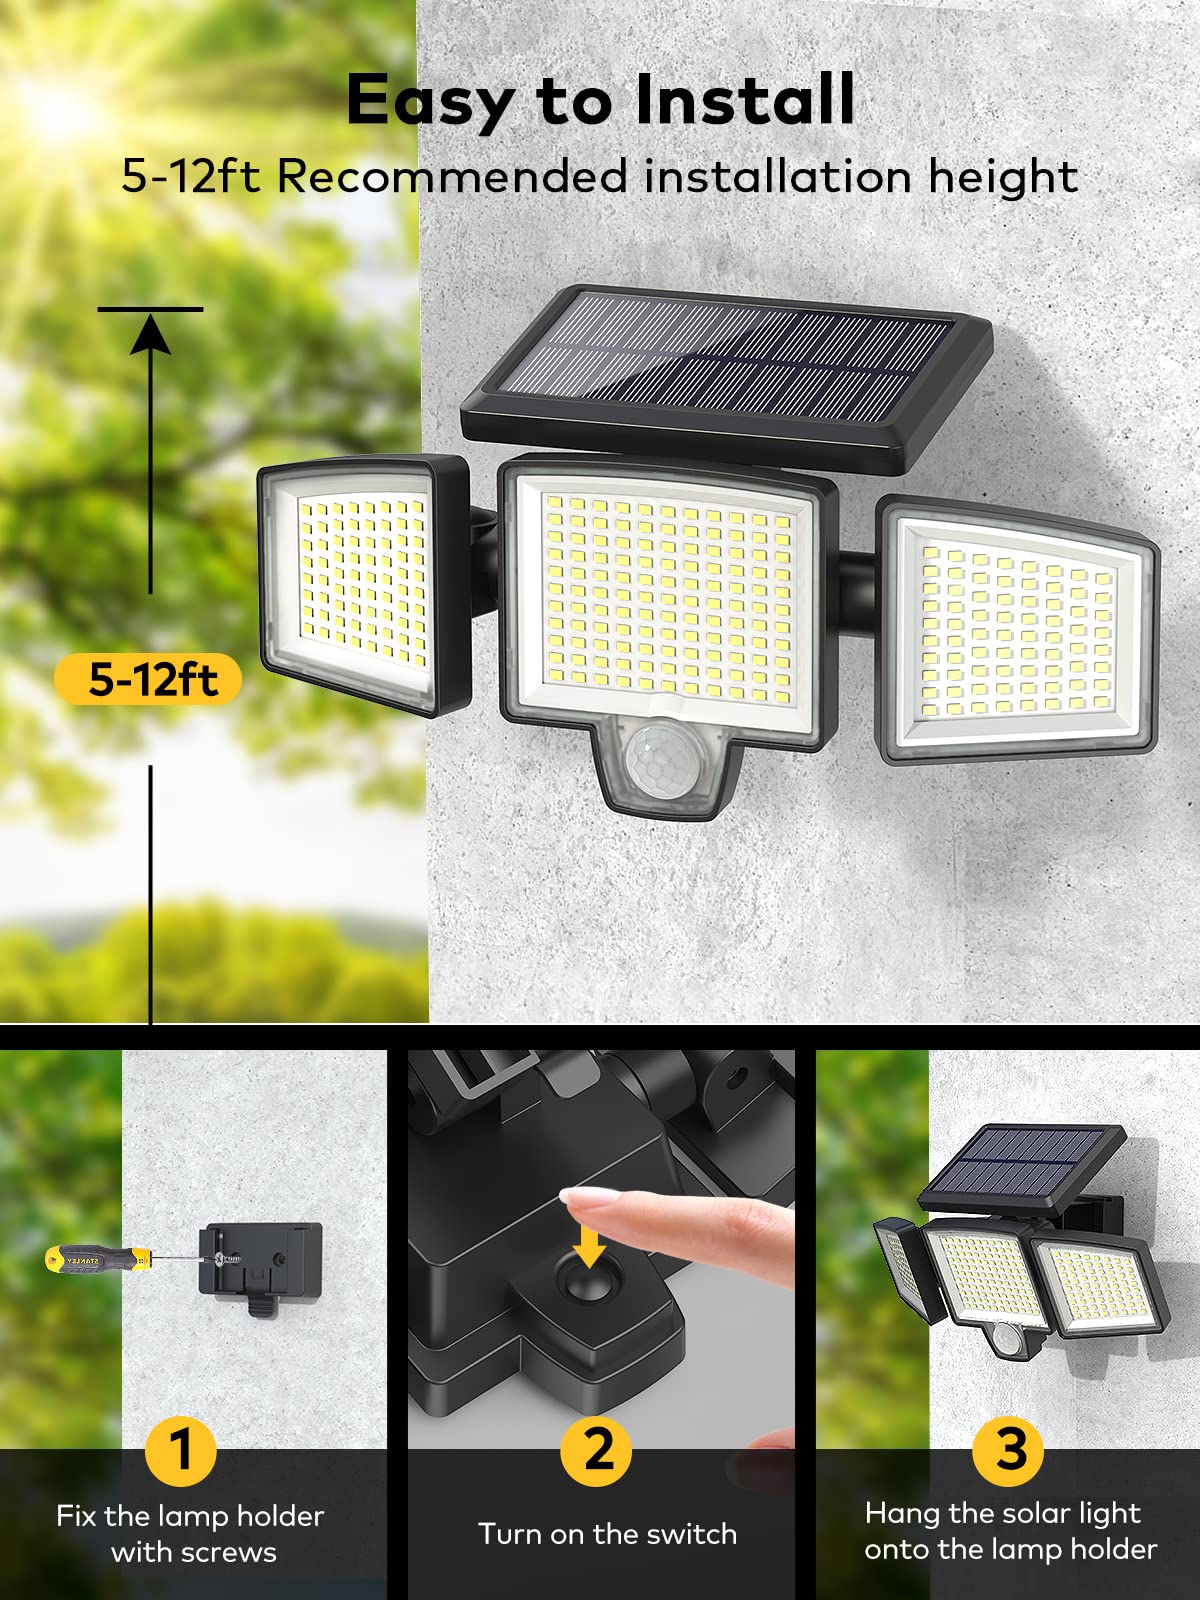 Atronor Solar Outdoor Lights, 265 LED 2800LM Security Flood Lights with Motion Senor, Remote Control, 3 Lighting Modes, 3 Heads Outside Lights, 270° Wide Lighting, IP65 Waterproof Wall Light, 2 Packs